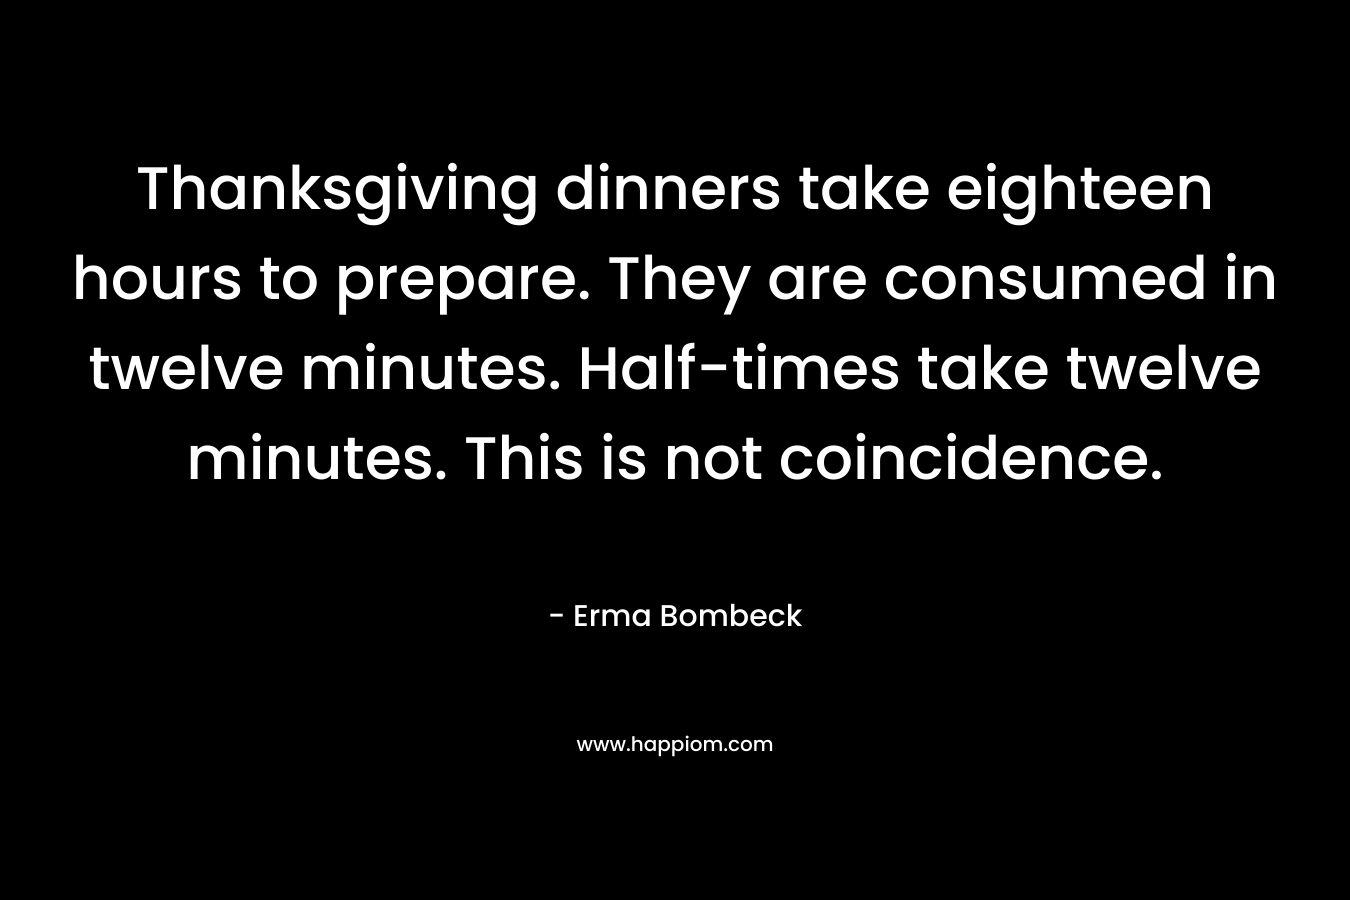 Thanksgiving dinners take eighteen hours to prepare. They are consumed in twelve minutes. Half-times take twelve minutes. This is not coincidence. – Erma Bombeck